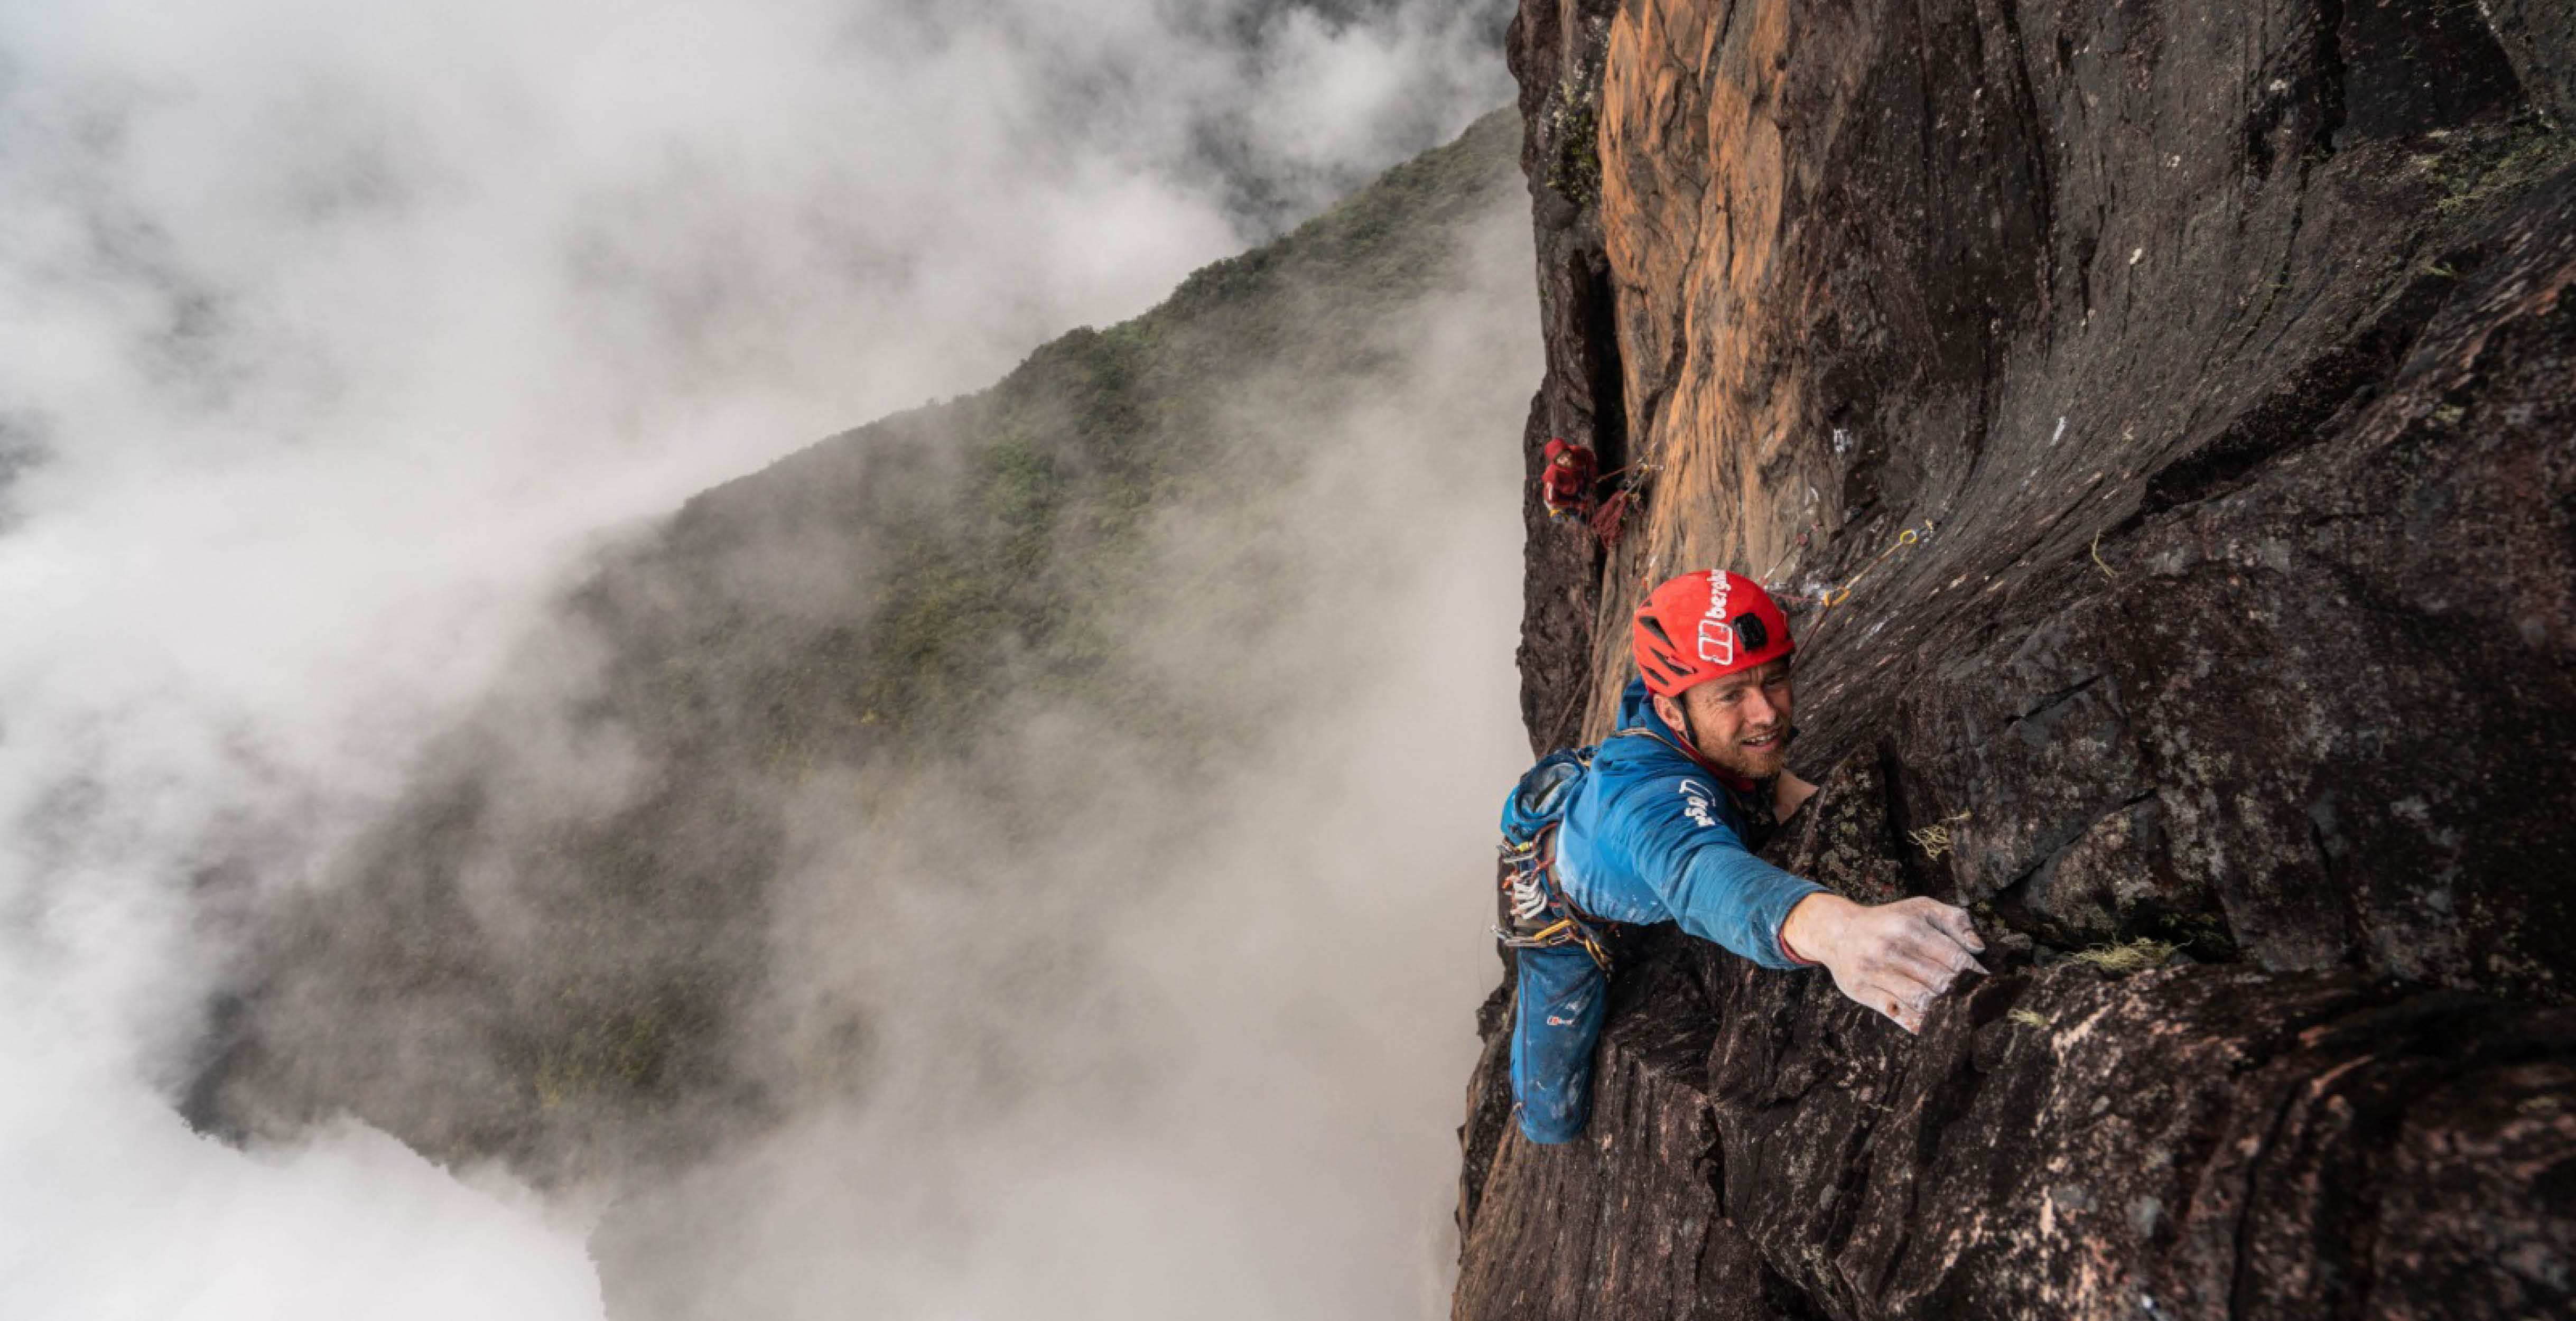 Berghaus ambassadors climb new route on the mountain that inspired ‘The Lost World’